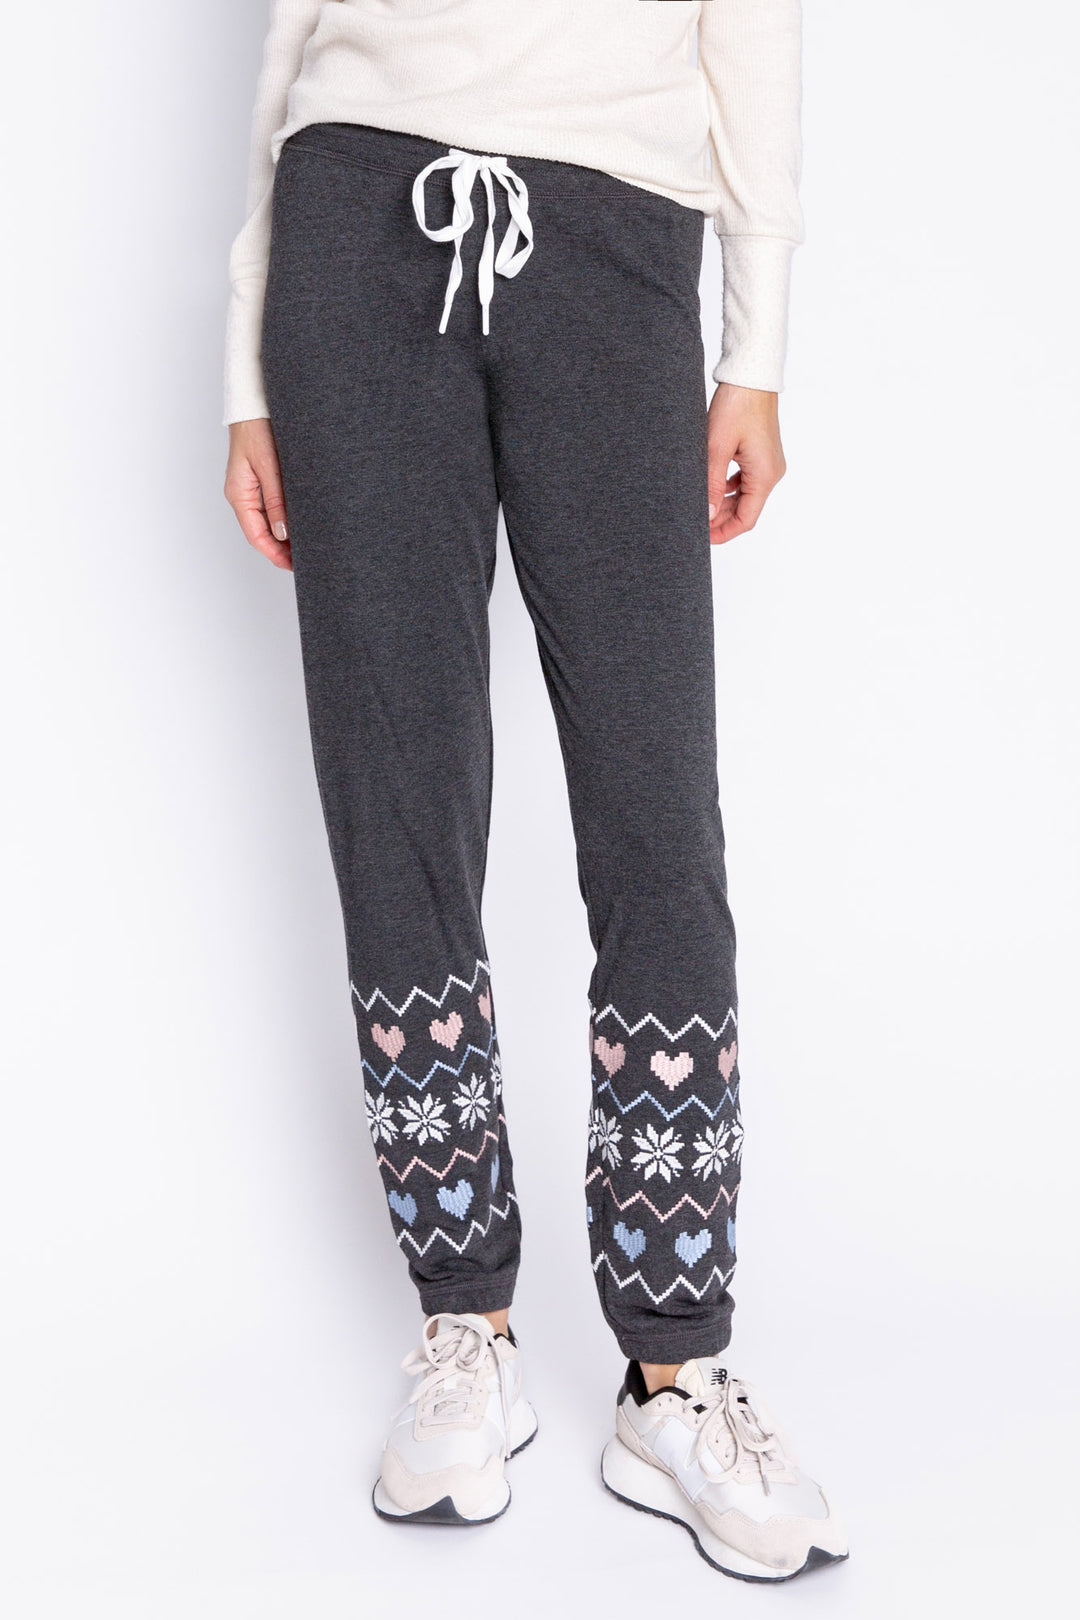 Slate grey fleece banded jogger pants with oversized fair isle graphic and adjustable tie waist. (6982899597412)